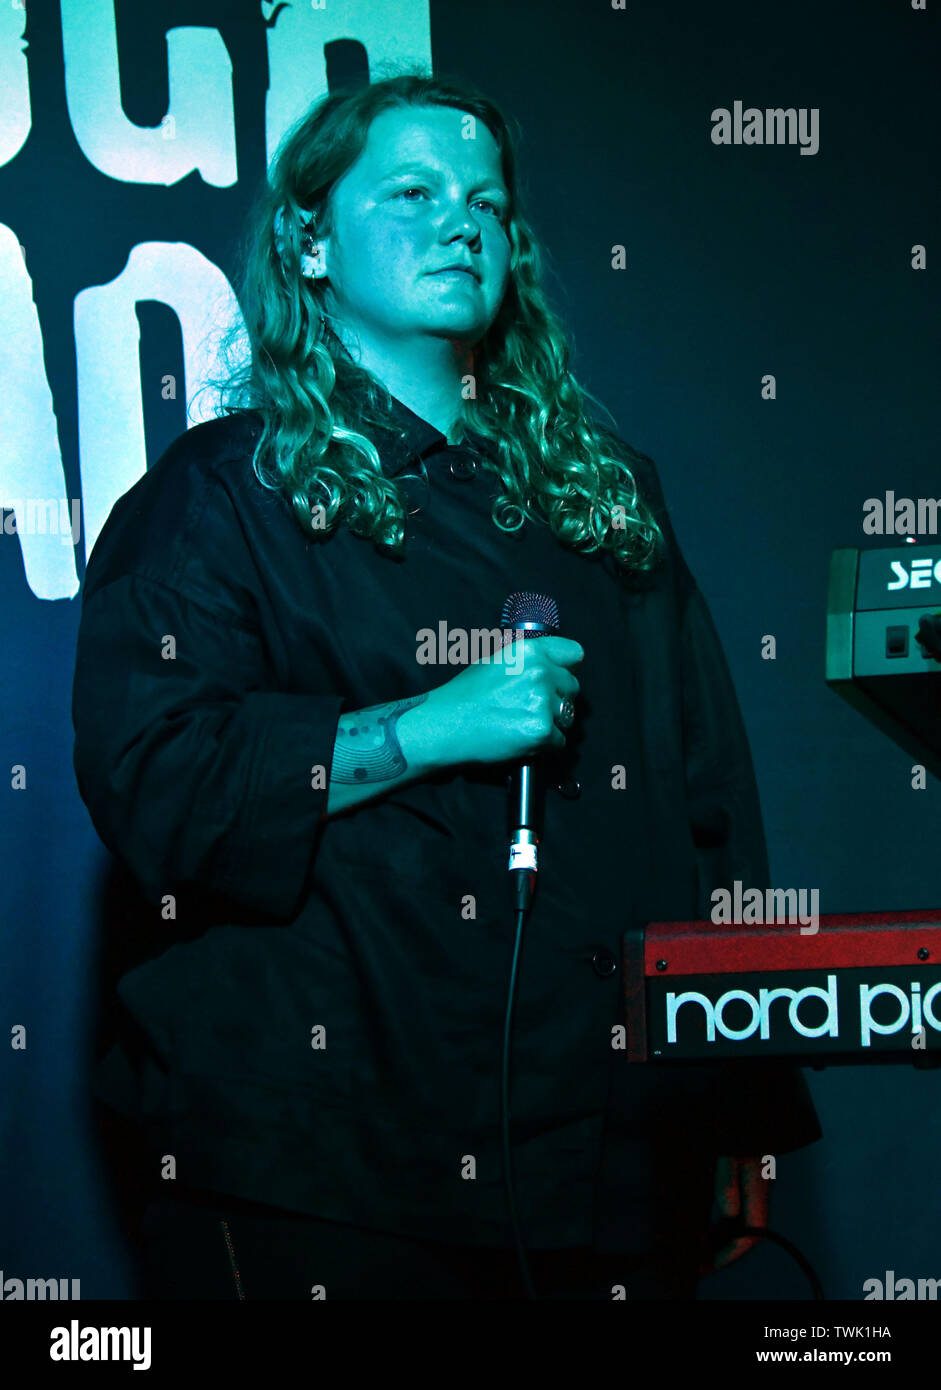 London, UK. 20th June, 2019. Kate Tempest, Mercury Prize-nominated British performance poet and musician performs live in store before signing copies of her new album The Book of Traps and Lessons, at Rough Trade East  London, UK - 20 June 2019 Credit: Nils Jorgensen/Alamy Live News Stock Photo